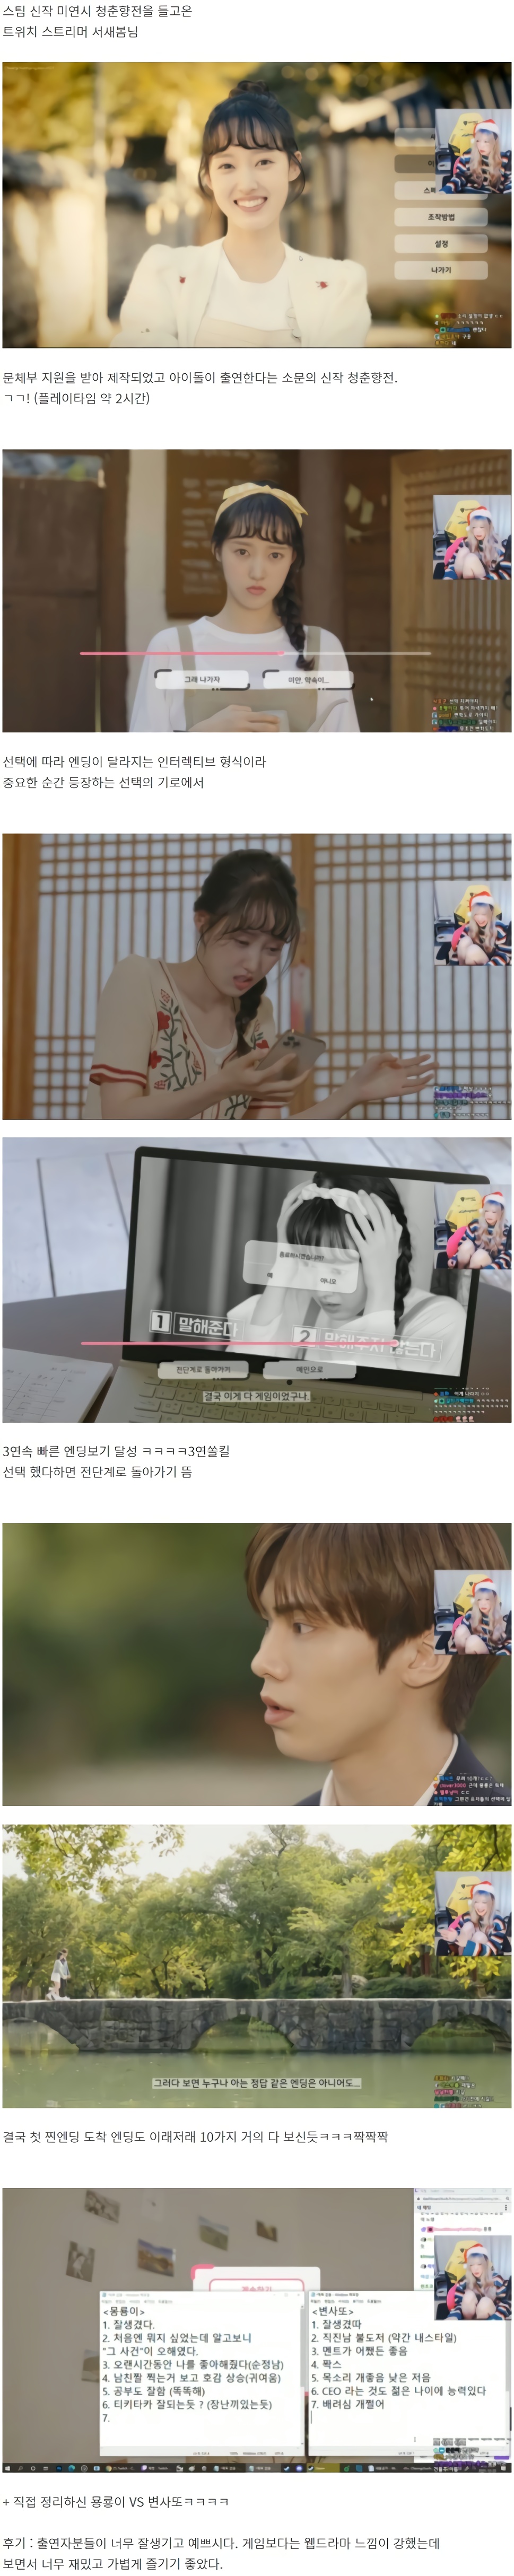 Streamer Saebom's "Before and after Chunhyang" of Miyeon City Hall.